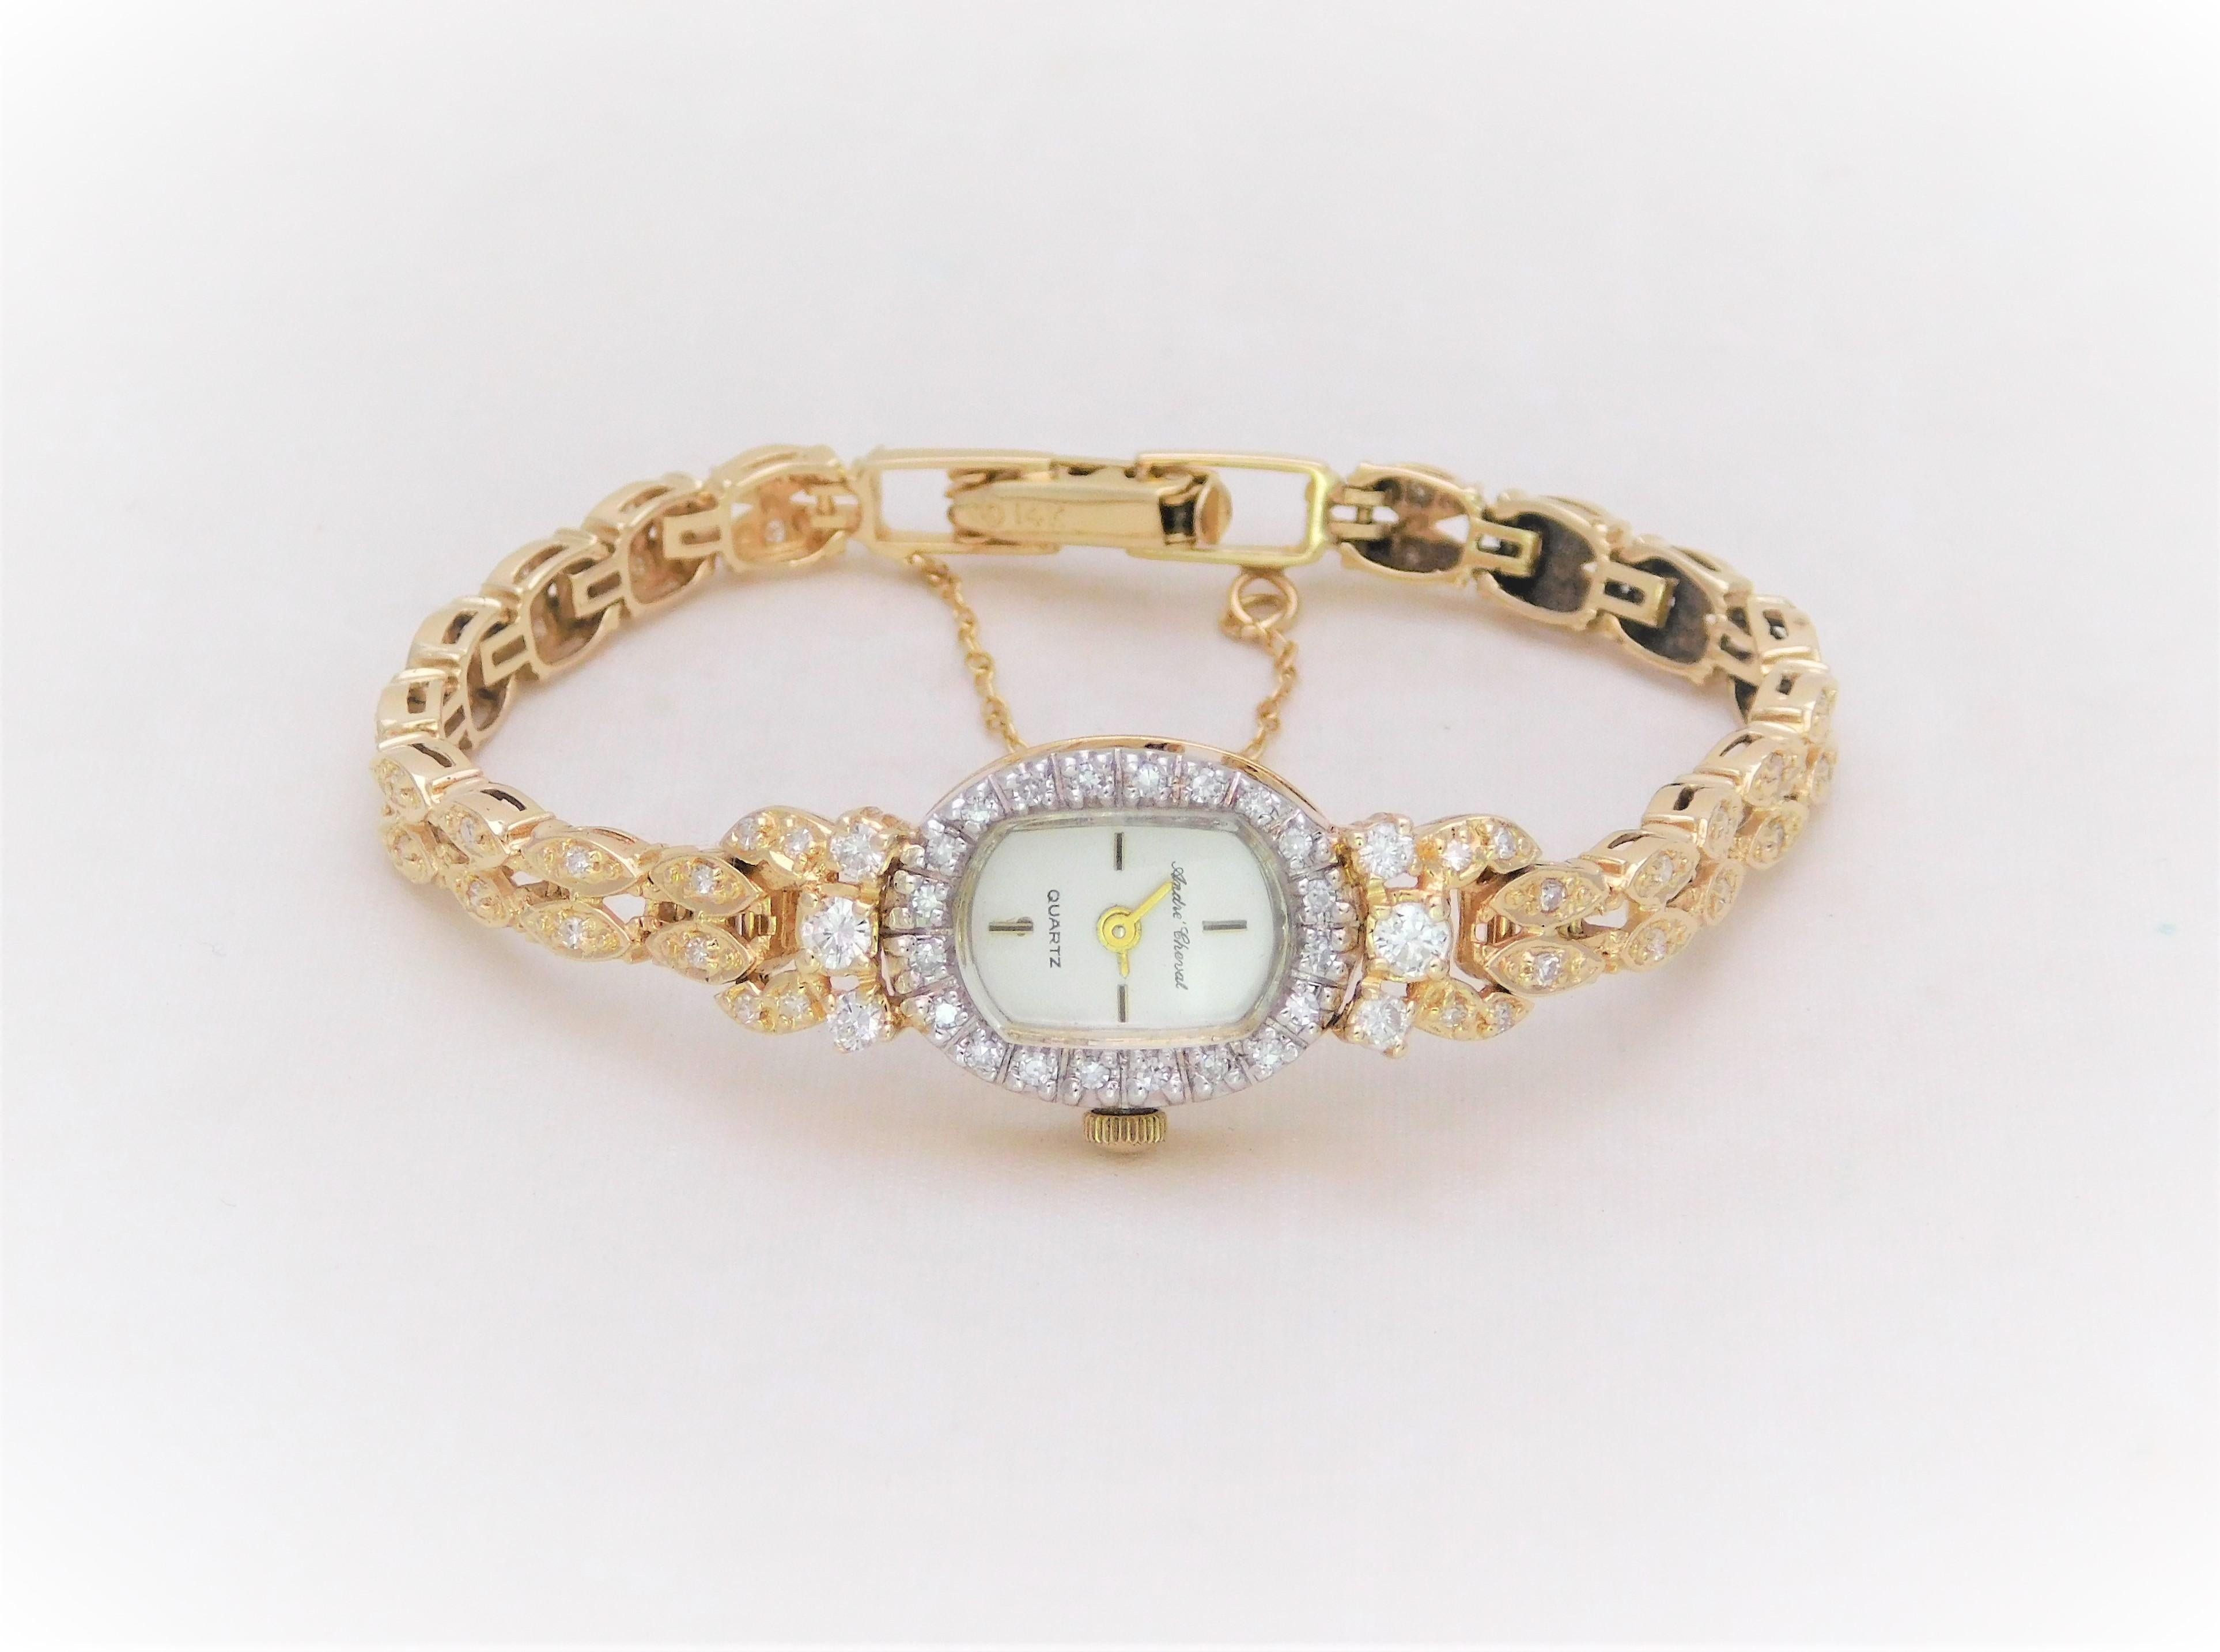 From a lovely Southern estate. This gorgeous  Andre Cheval ladies timepiece has been crafted in solid 14k yellow gold.  This was an uncommon color as most of the timepieces created in this style were in white gold or platinum.  
The elegant diamond